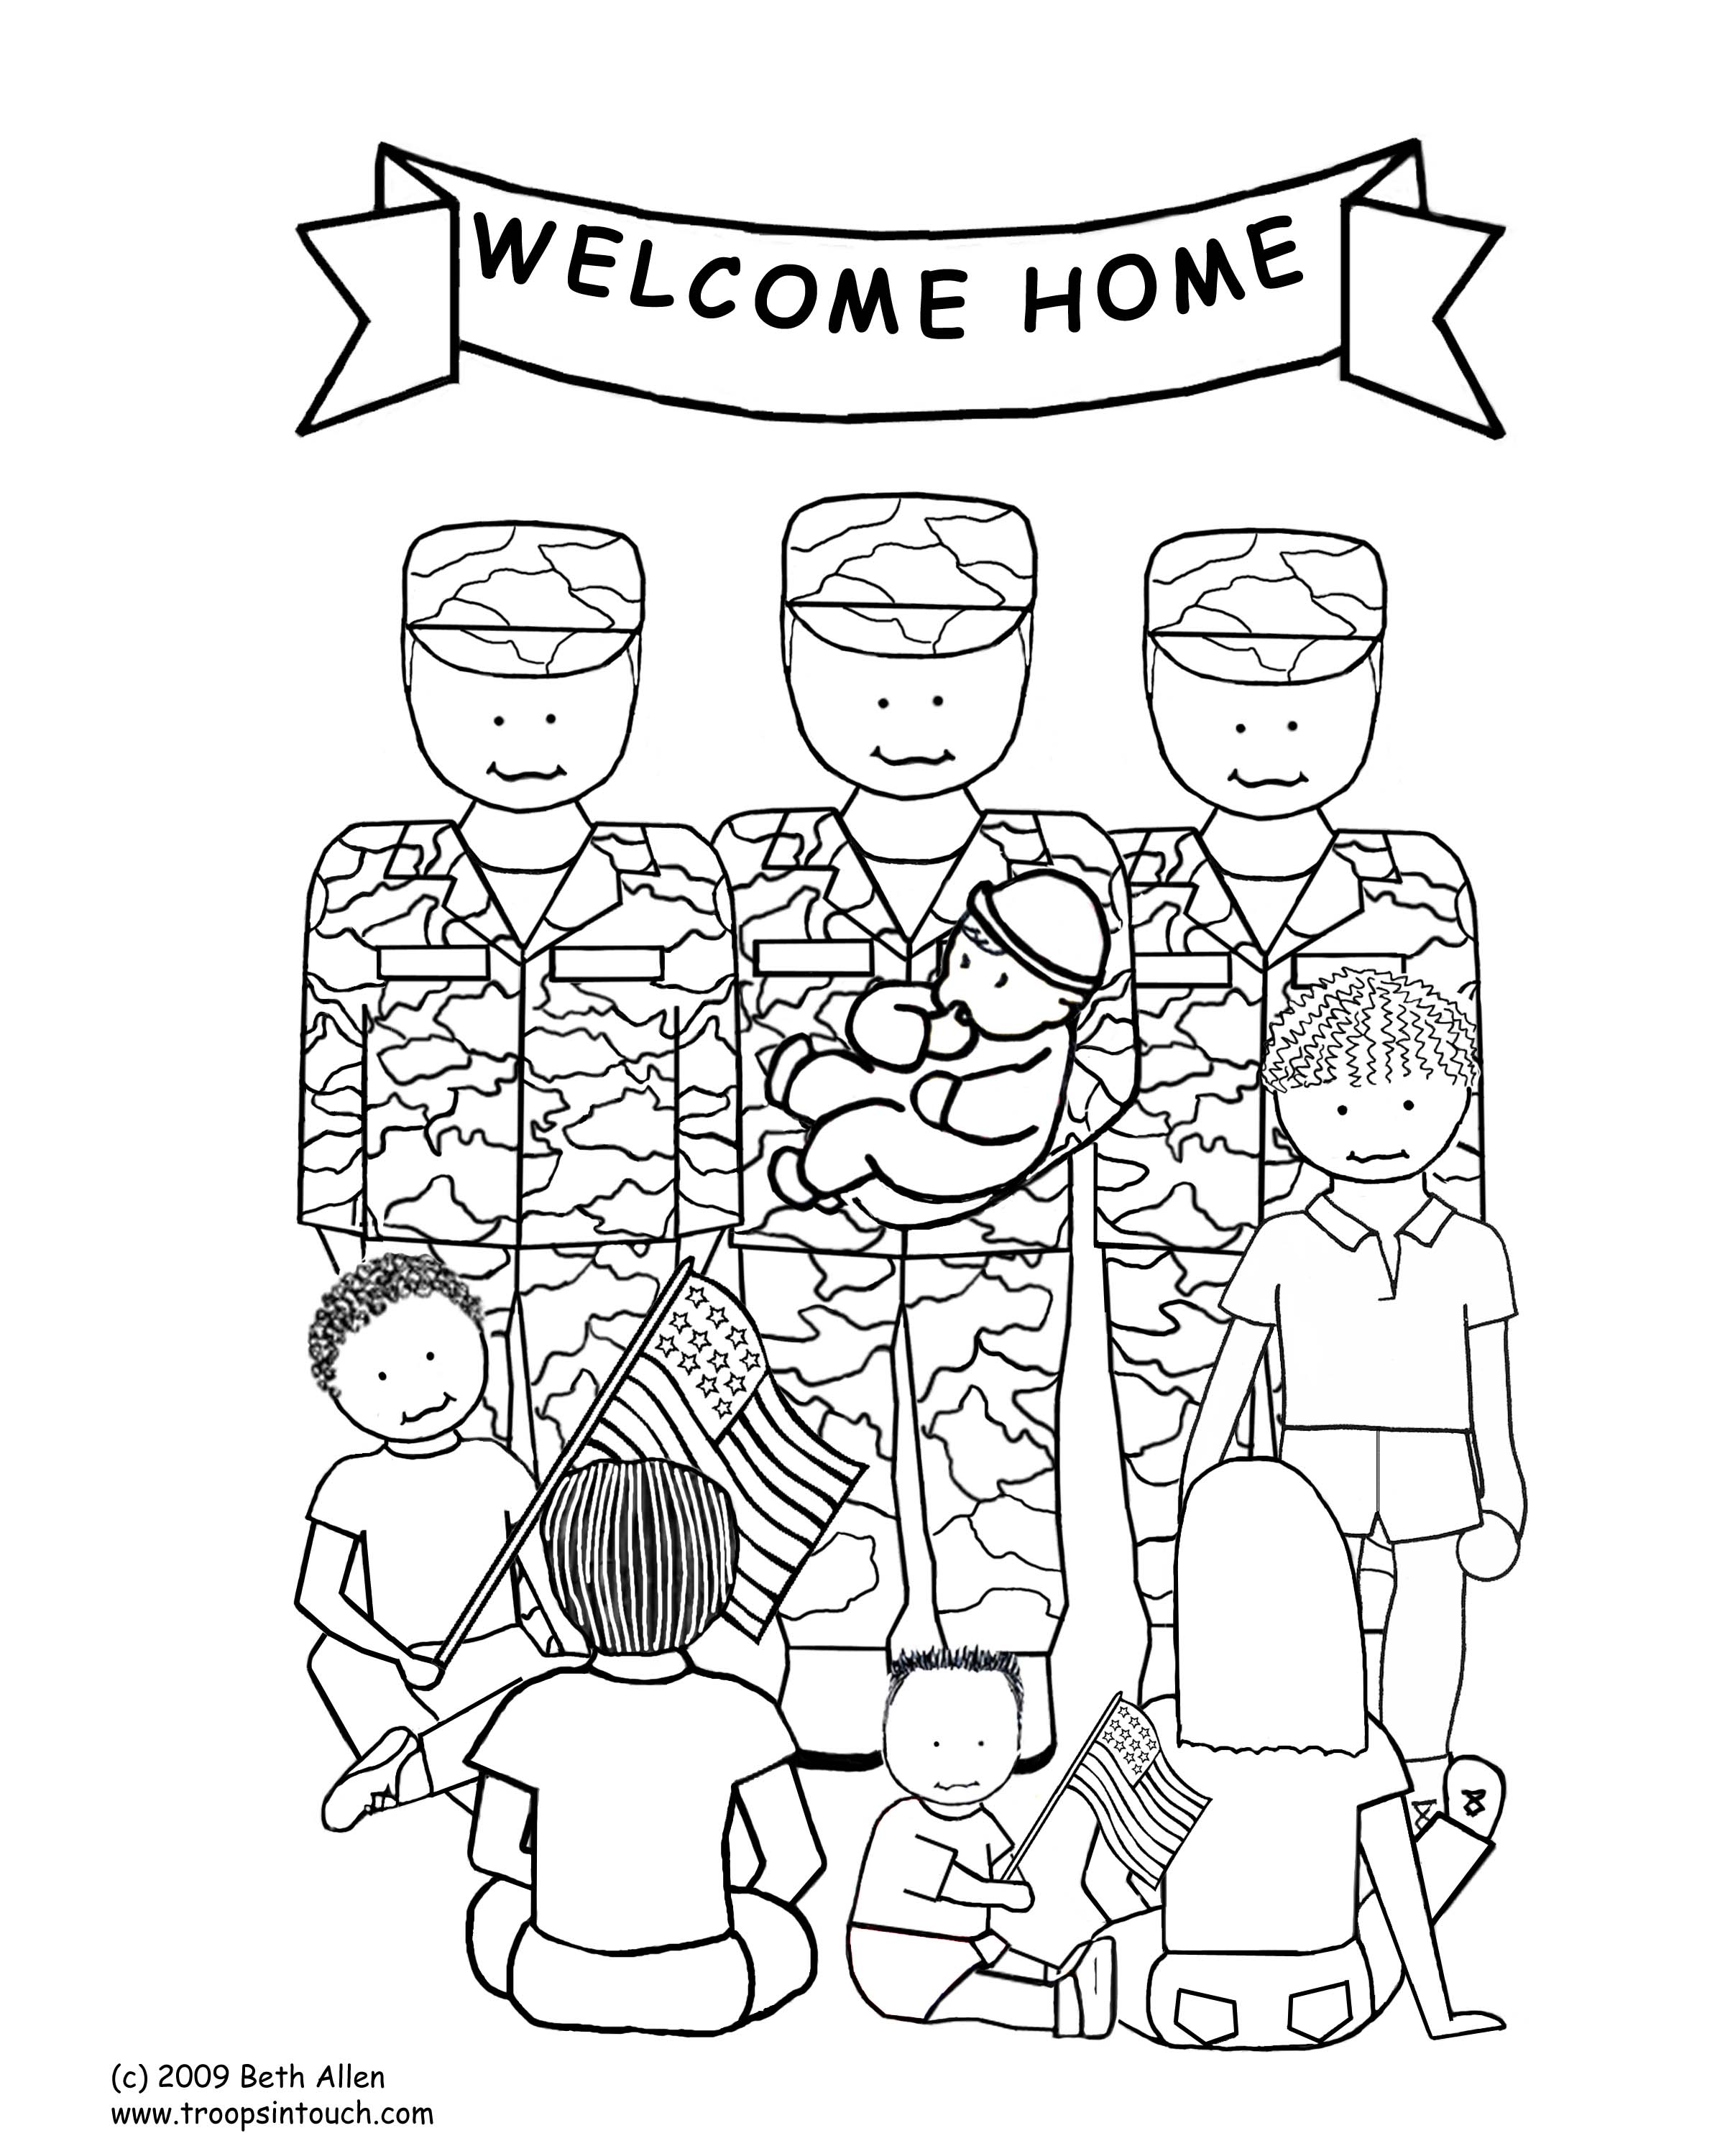 Download Coloring Pages And Books